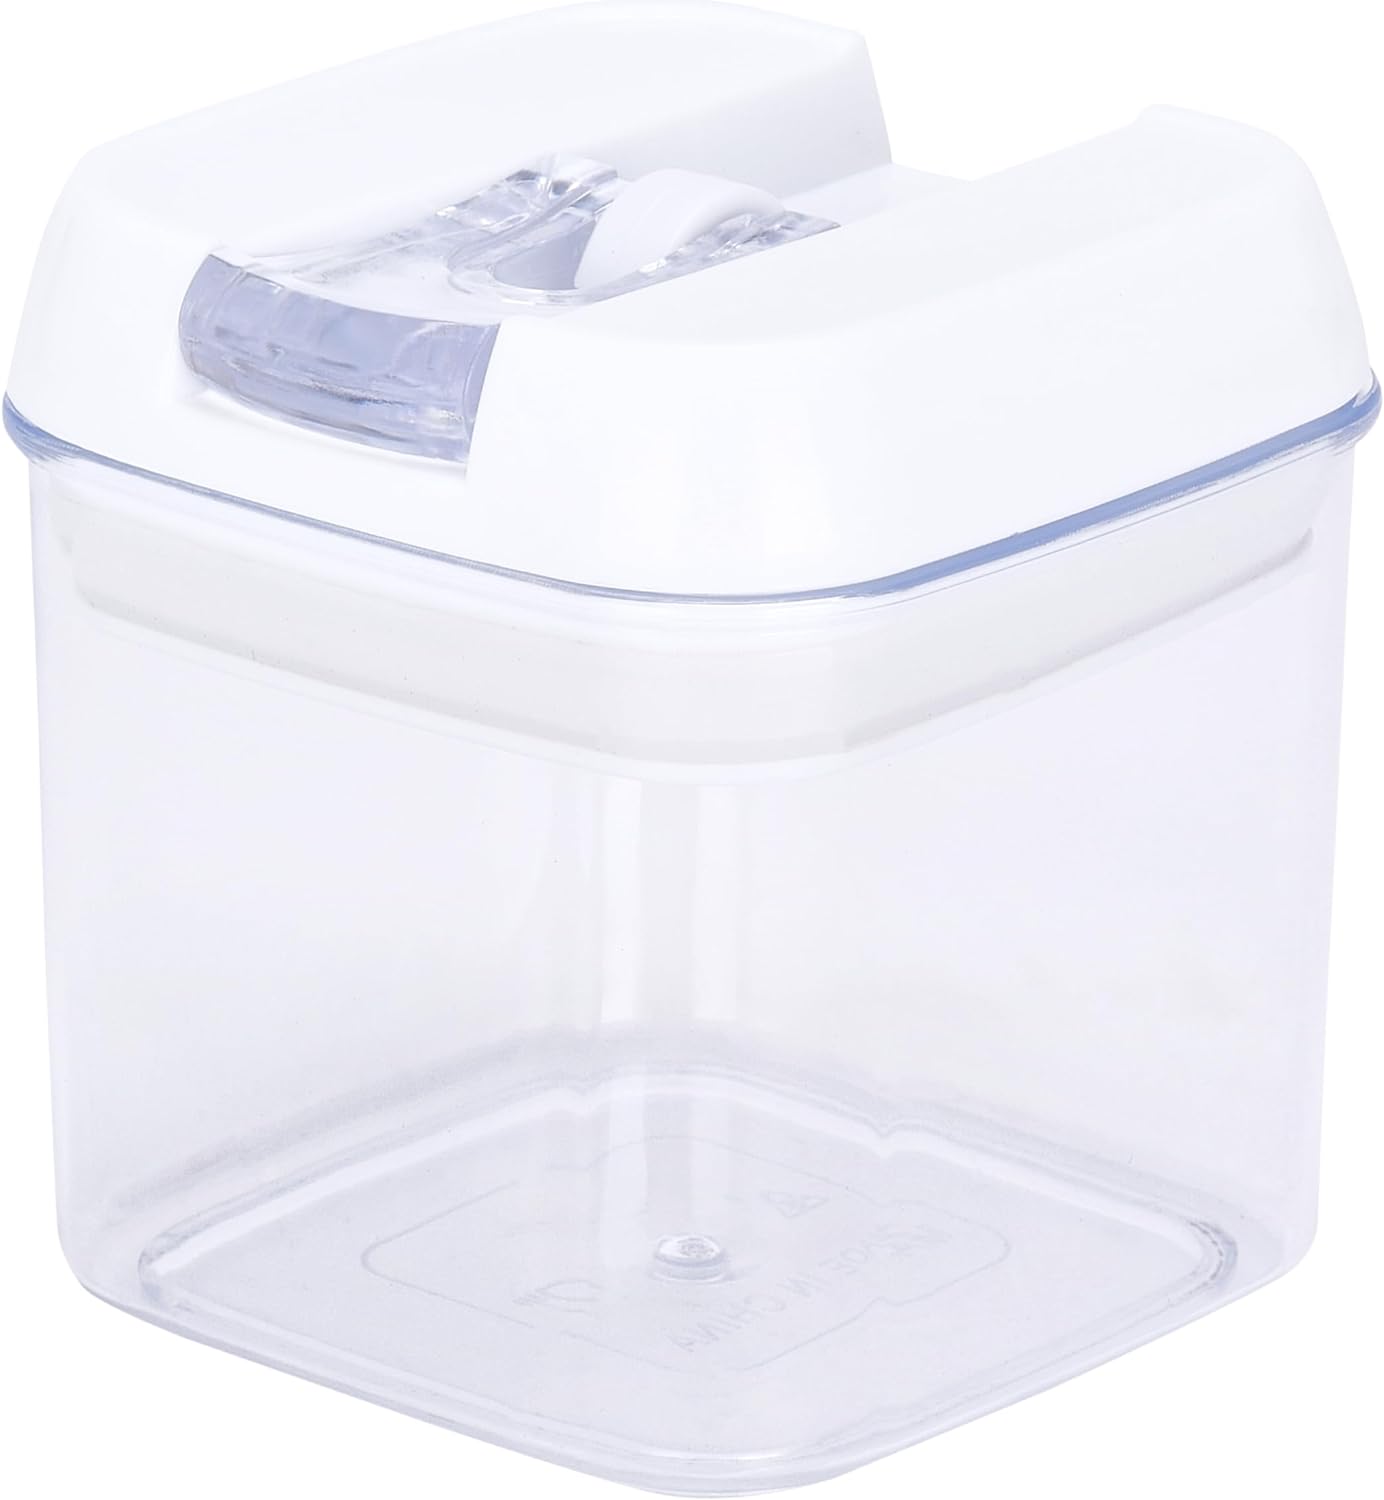 WHOLE HOUSEWARES Plastic Food Containers - Air-Tight Seal Food Storage with Lid - Durable and Resistant to Temperature Changes - Plastic and White Top Container for Organizing Kitchen and Pantry